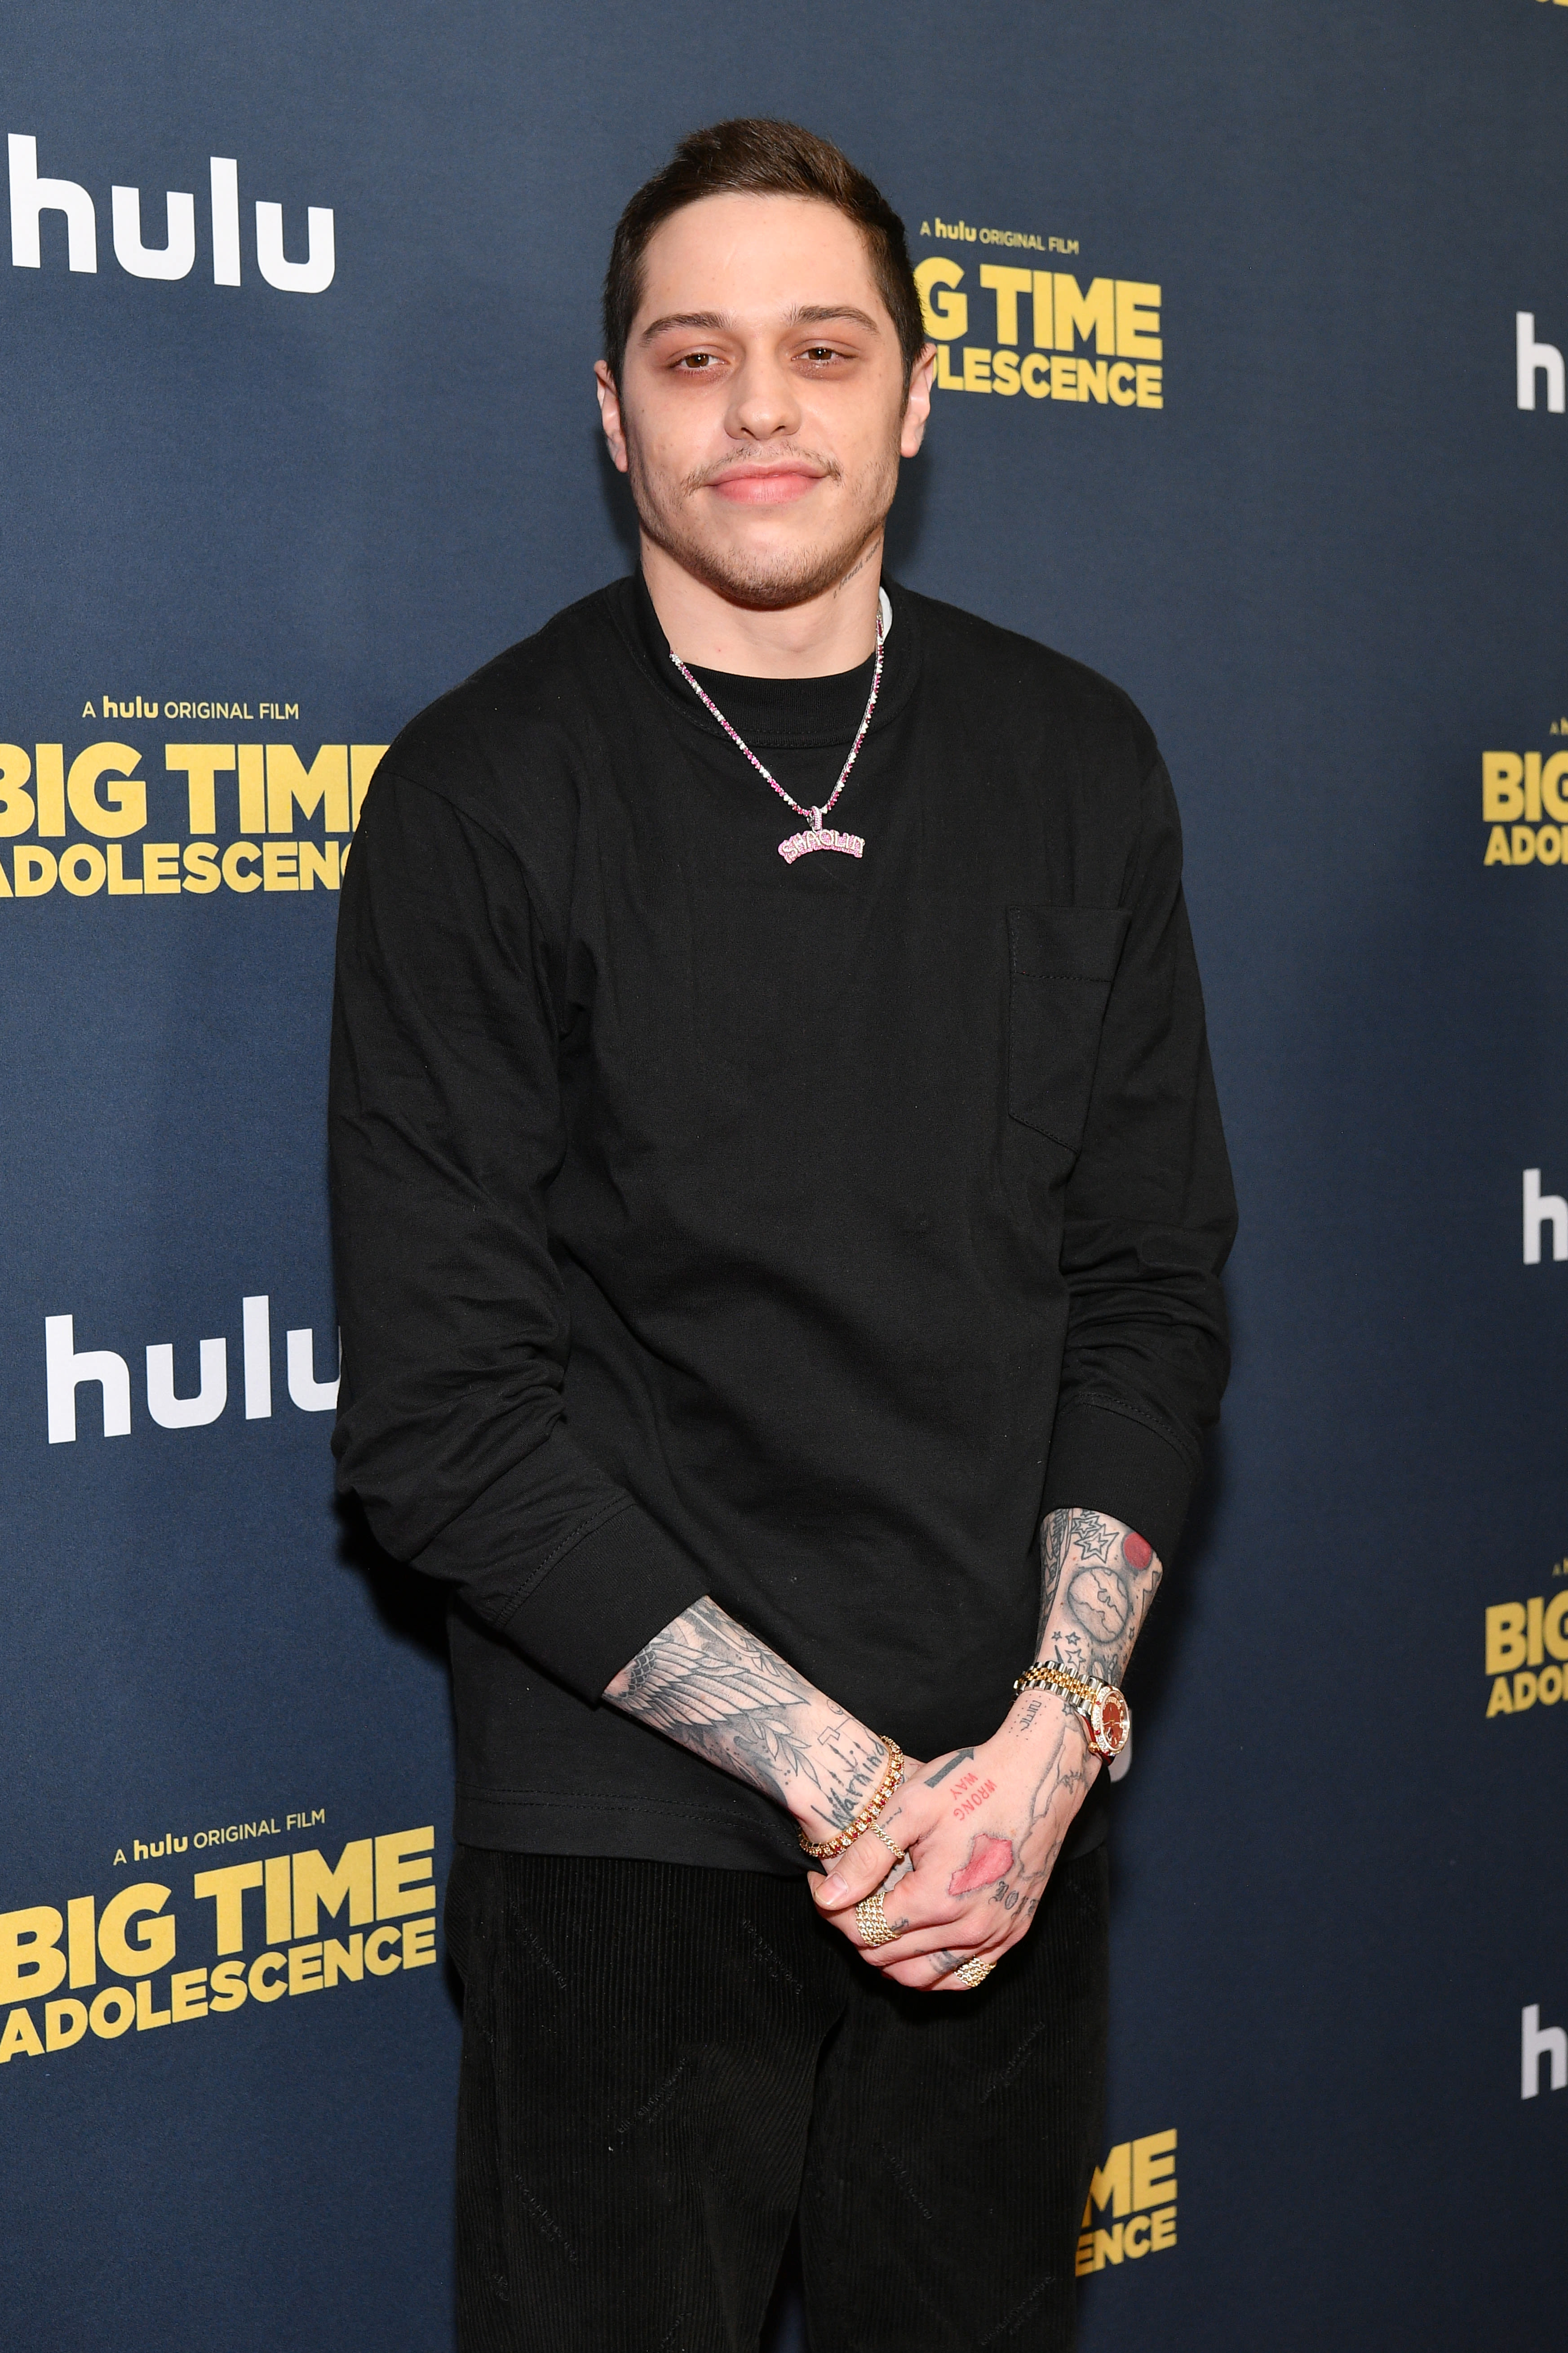 Pete Davidson Says He ‘Can’t Quit’ 1 Drug Amid Addiction Struggles: ‘It’s All I Have Left’